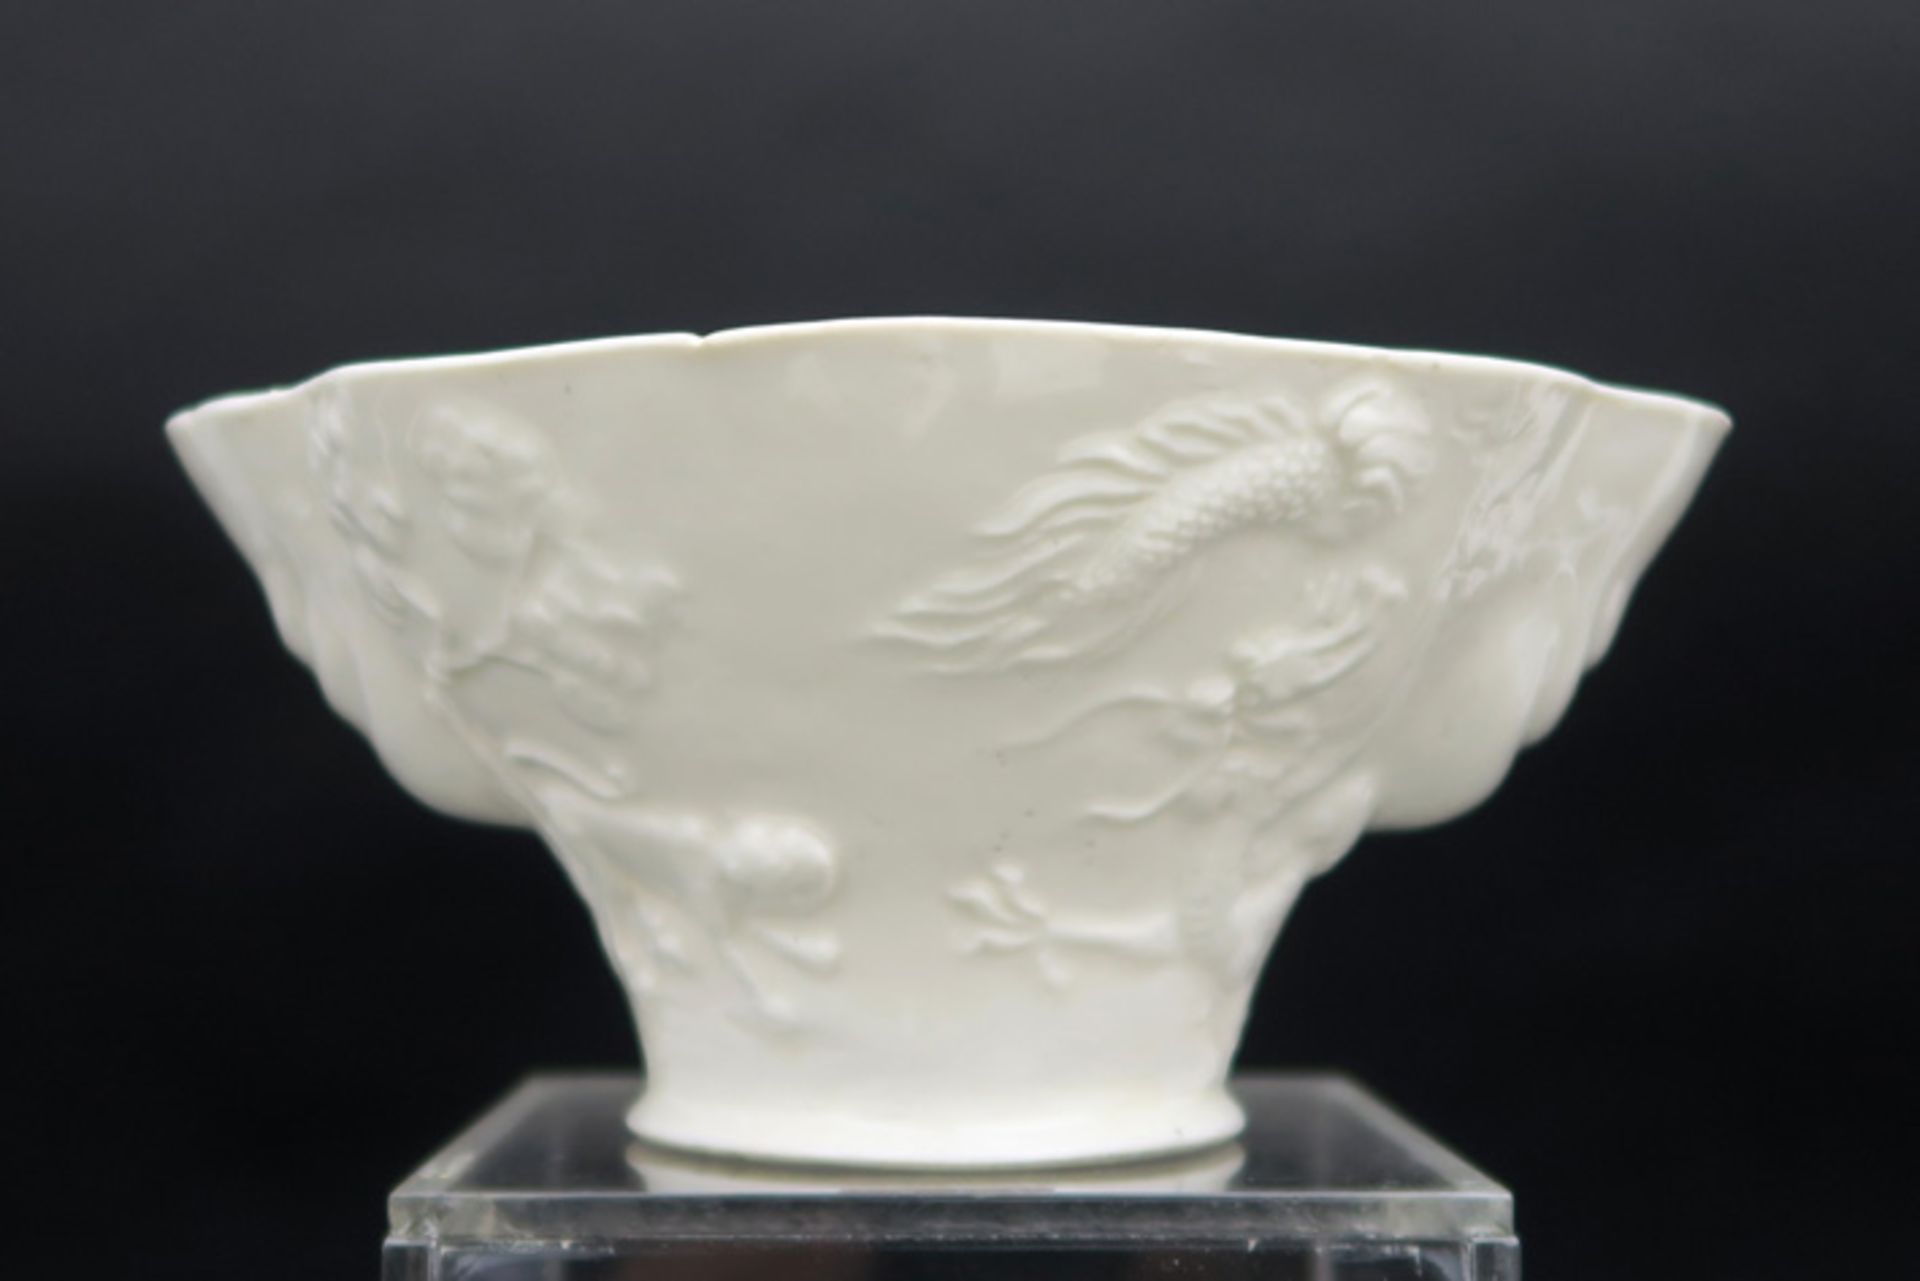 Chinese cup in "blanc de Chine" porcelain with a relief decor with mythical animals (deer, - Image 7 of 7